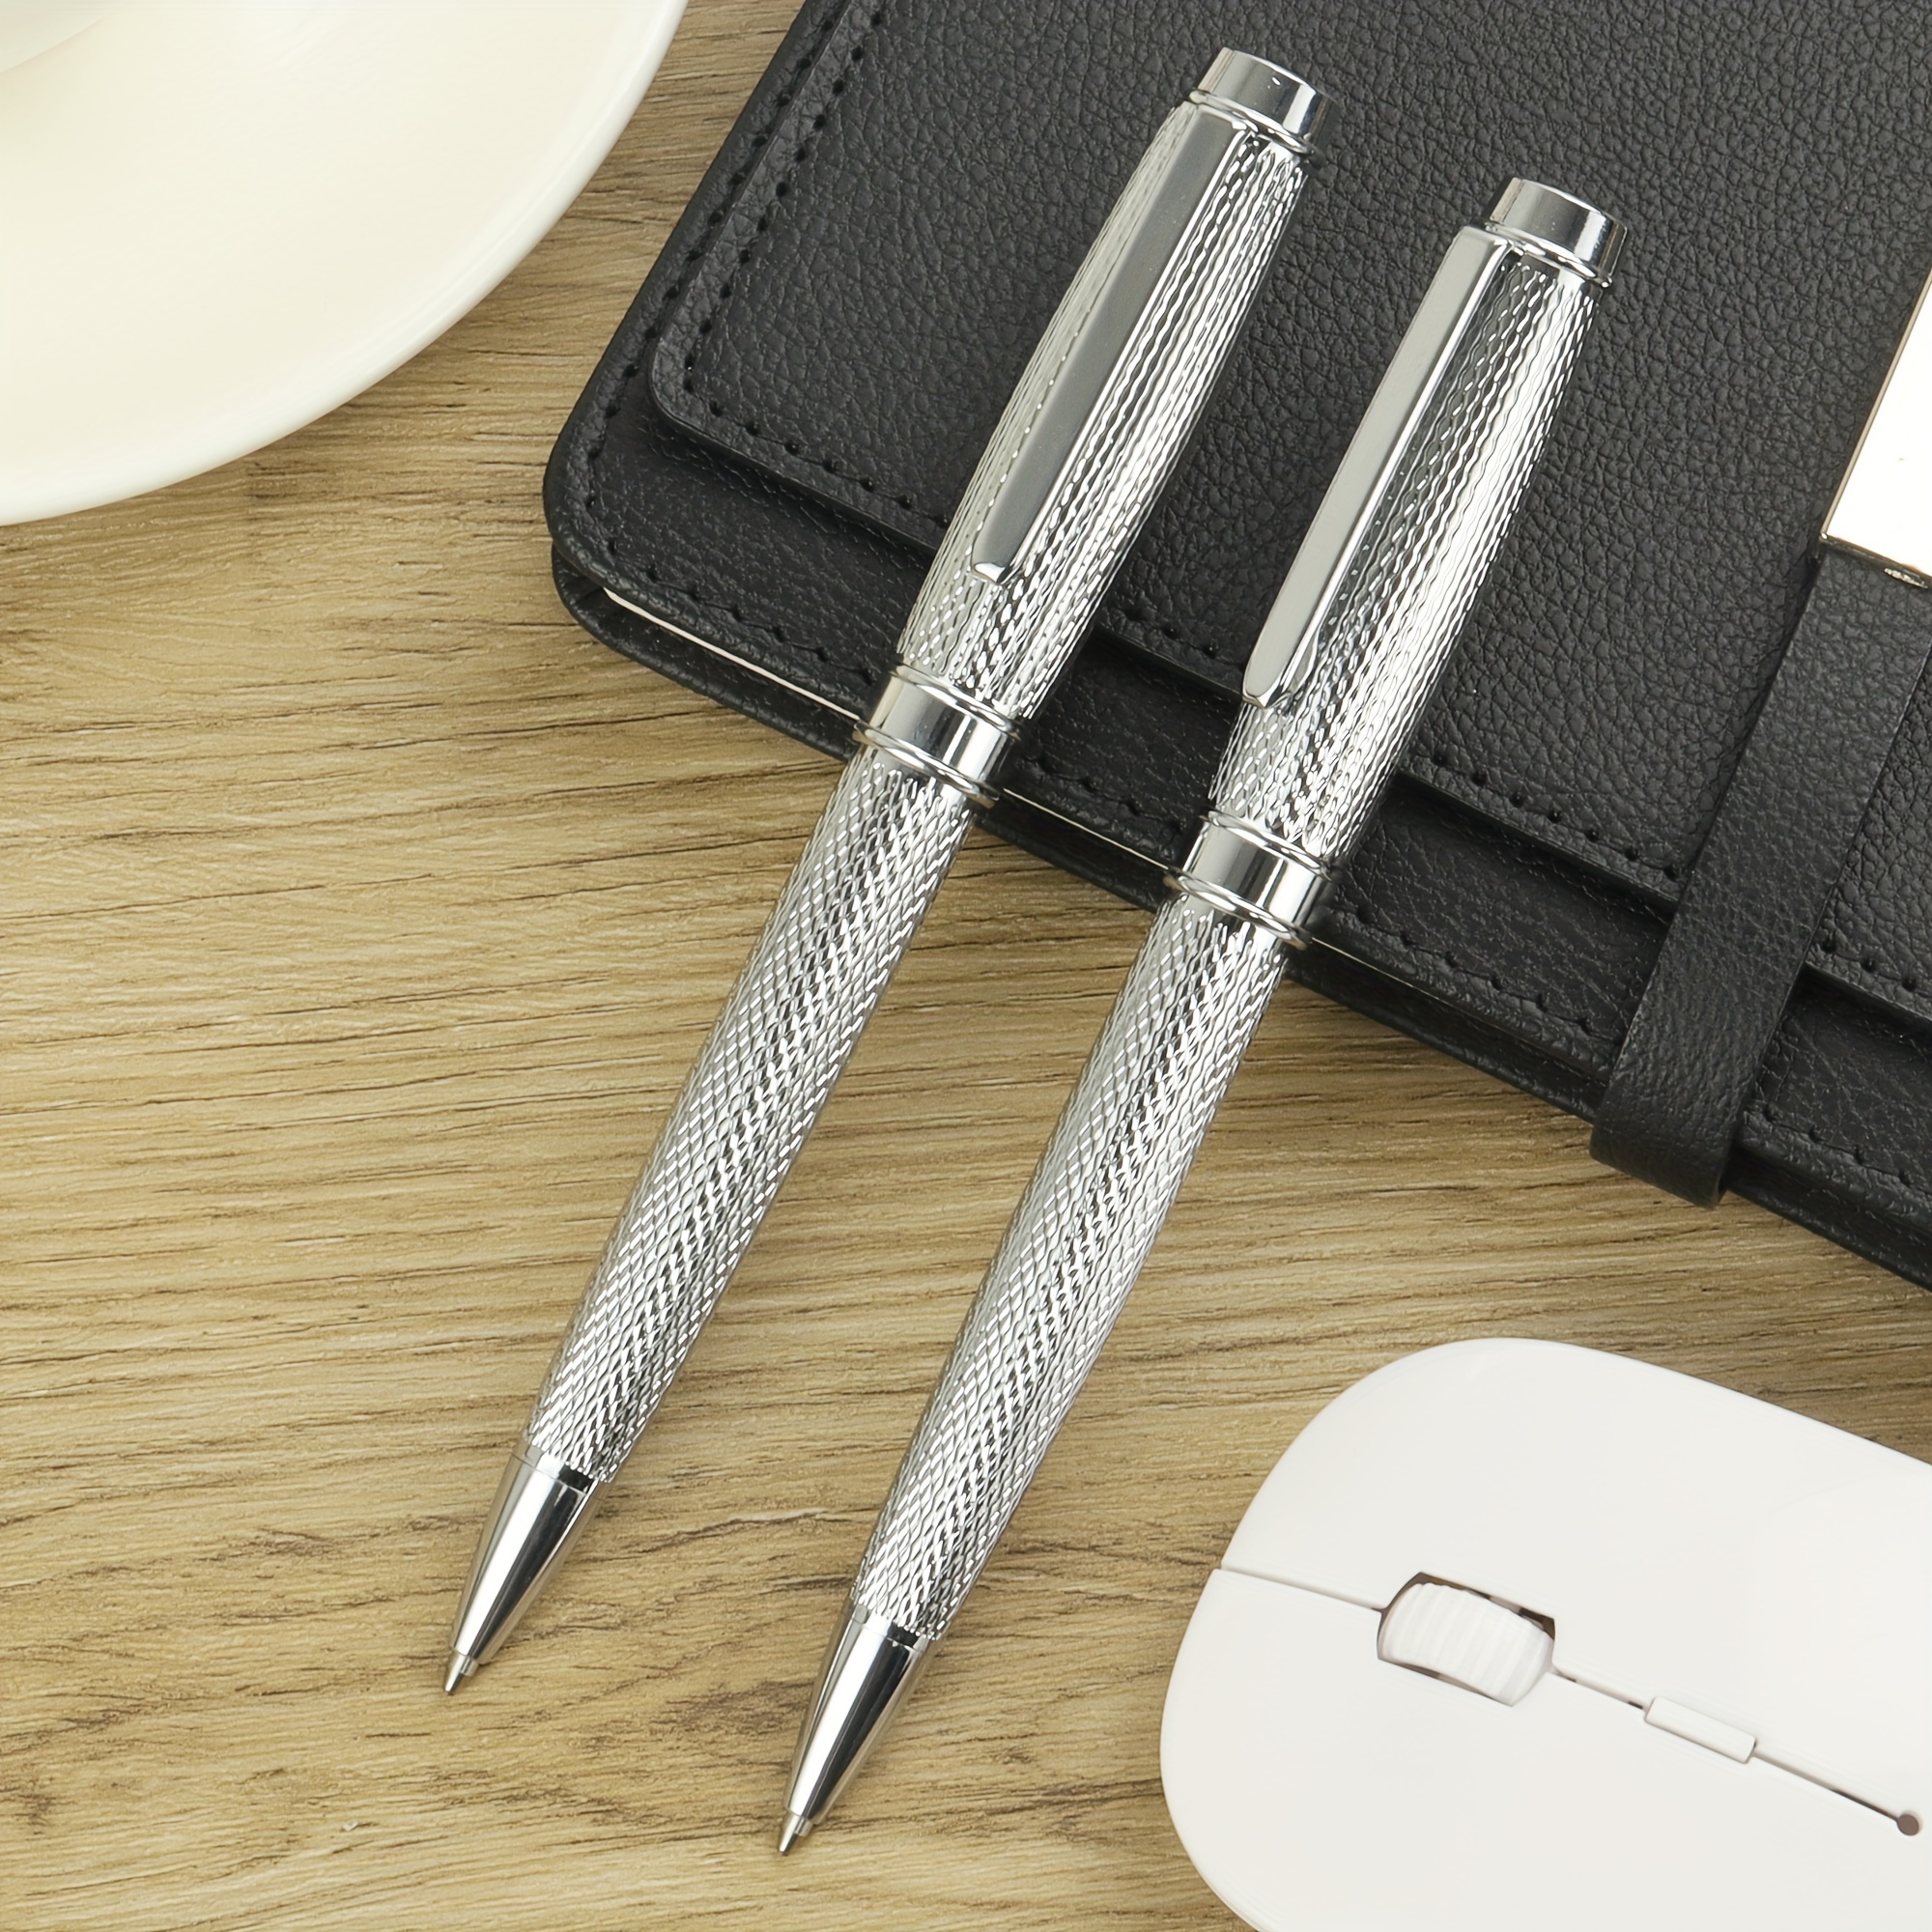 

1pc Boxed Ballpoint Pen, Noble Silver Argyle Pattern Road Pen Body, Bright In The Eyes, Suitable For Self Use, School Use, Office Signature, Gifts, Smooth Writing